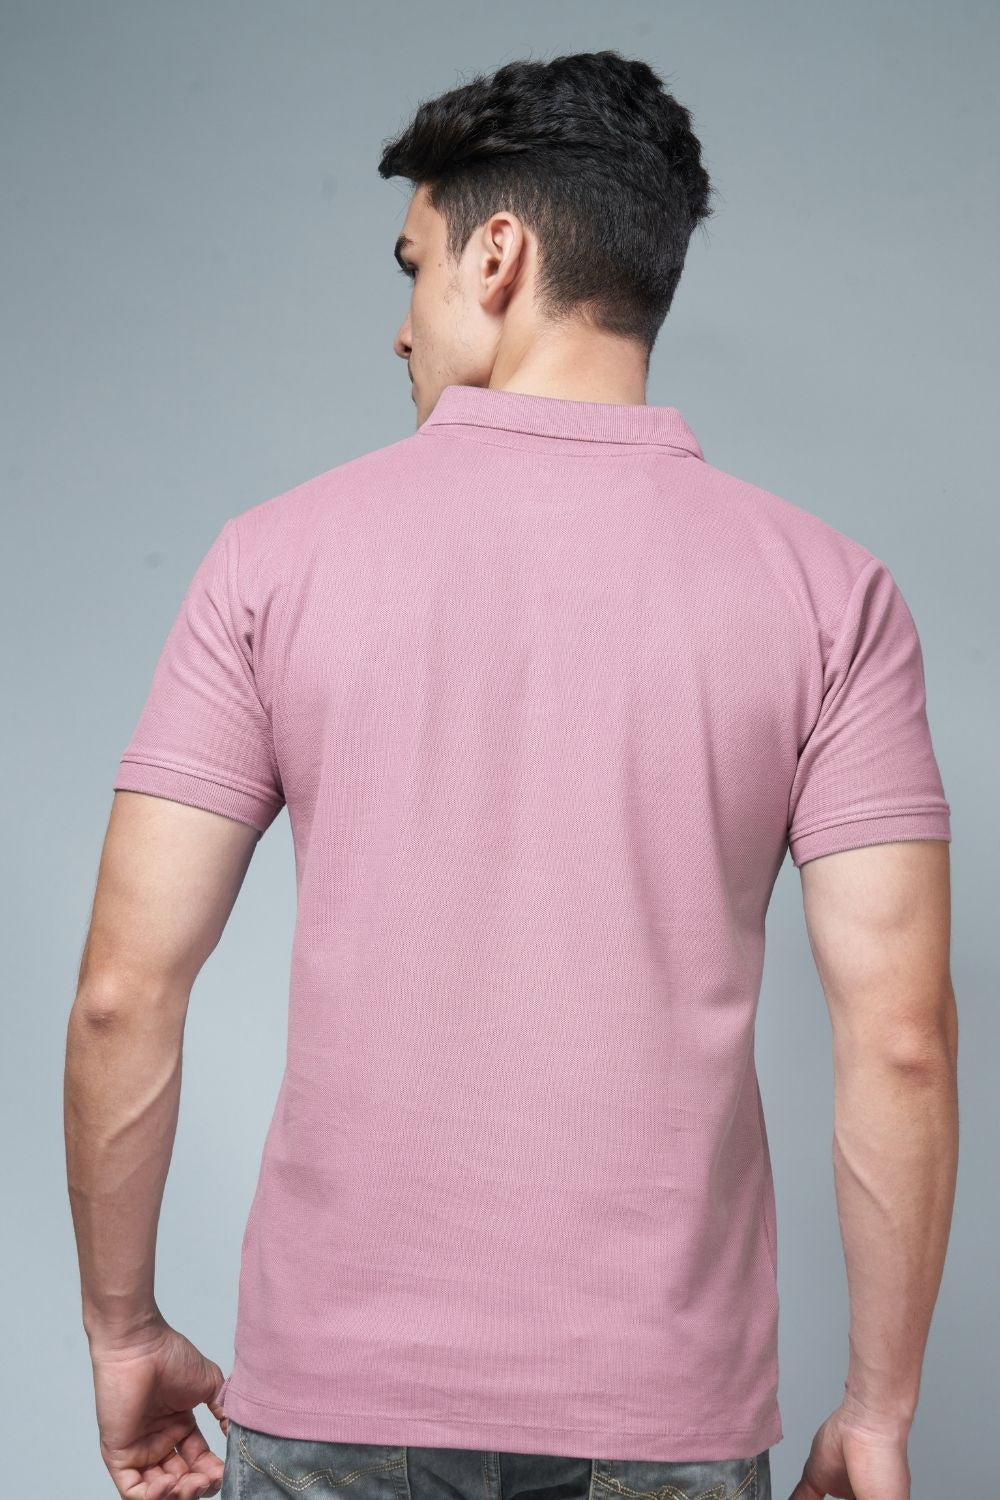 Salmon Pink colored, identity Polo T-shirts for men with collar and half sleeves, back view.